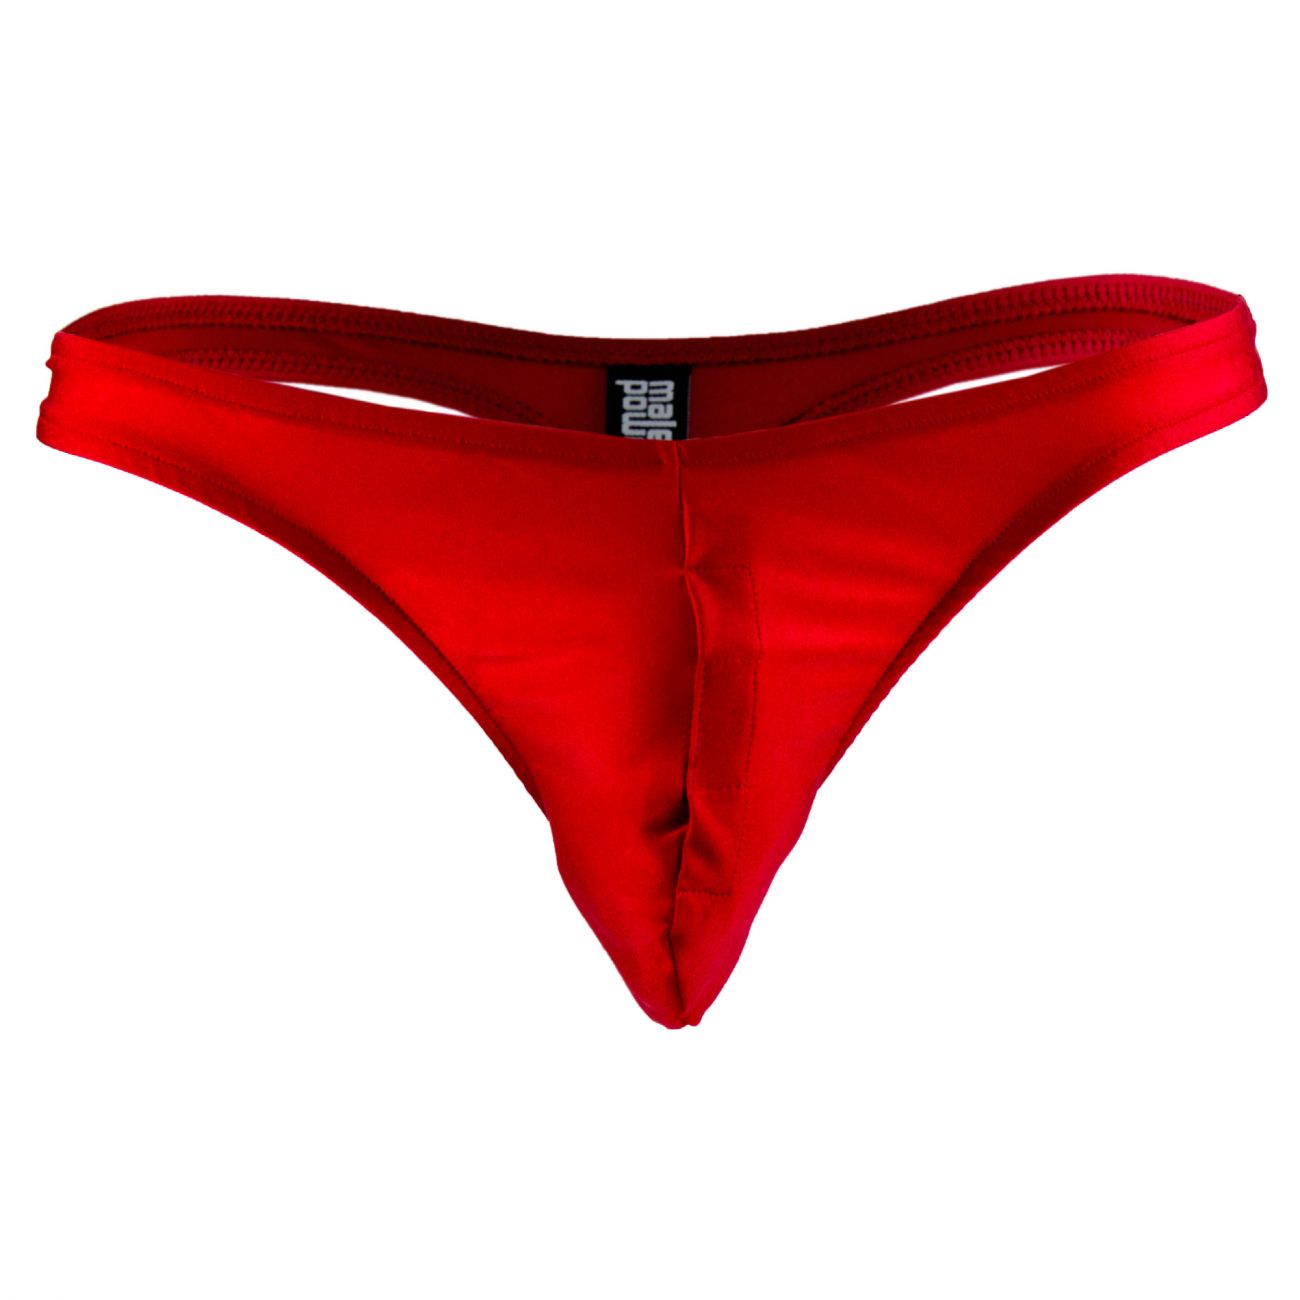 Male Power PAK834 Pull Tab Thong Color Red